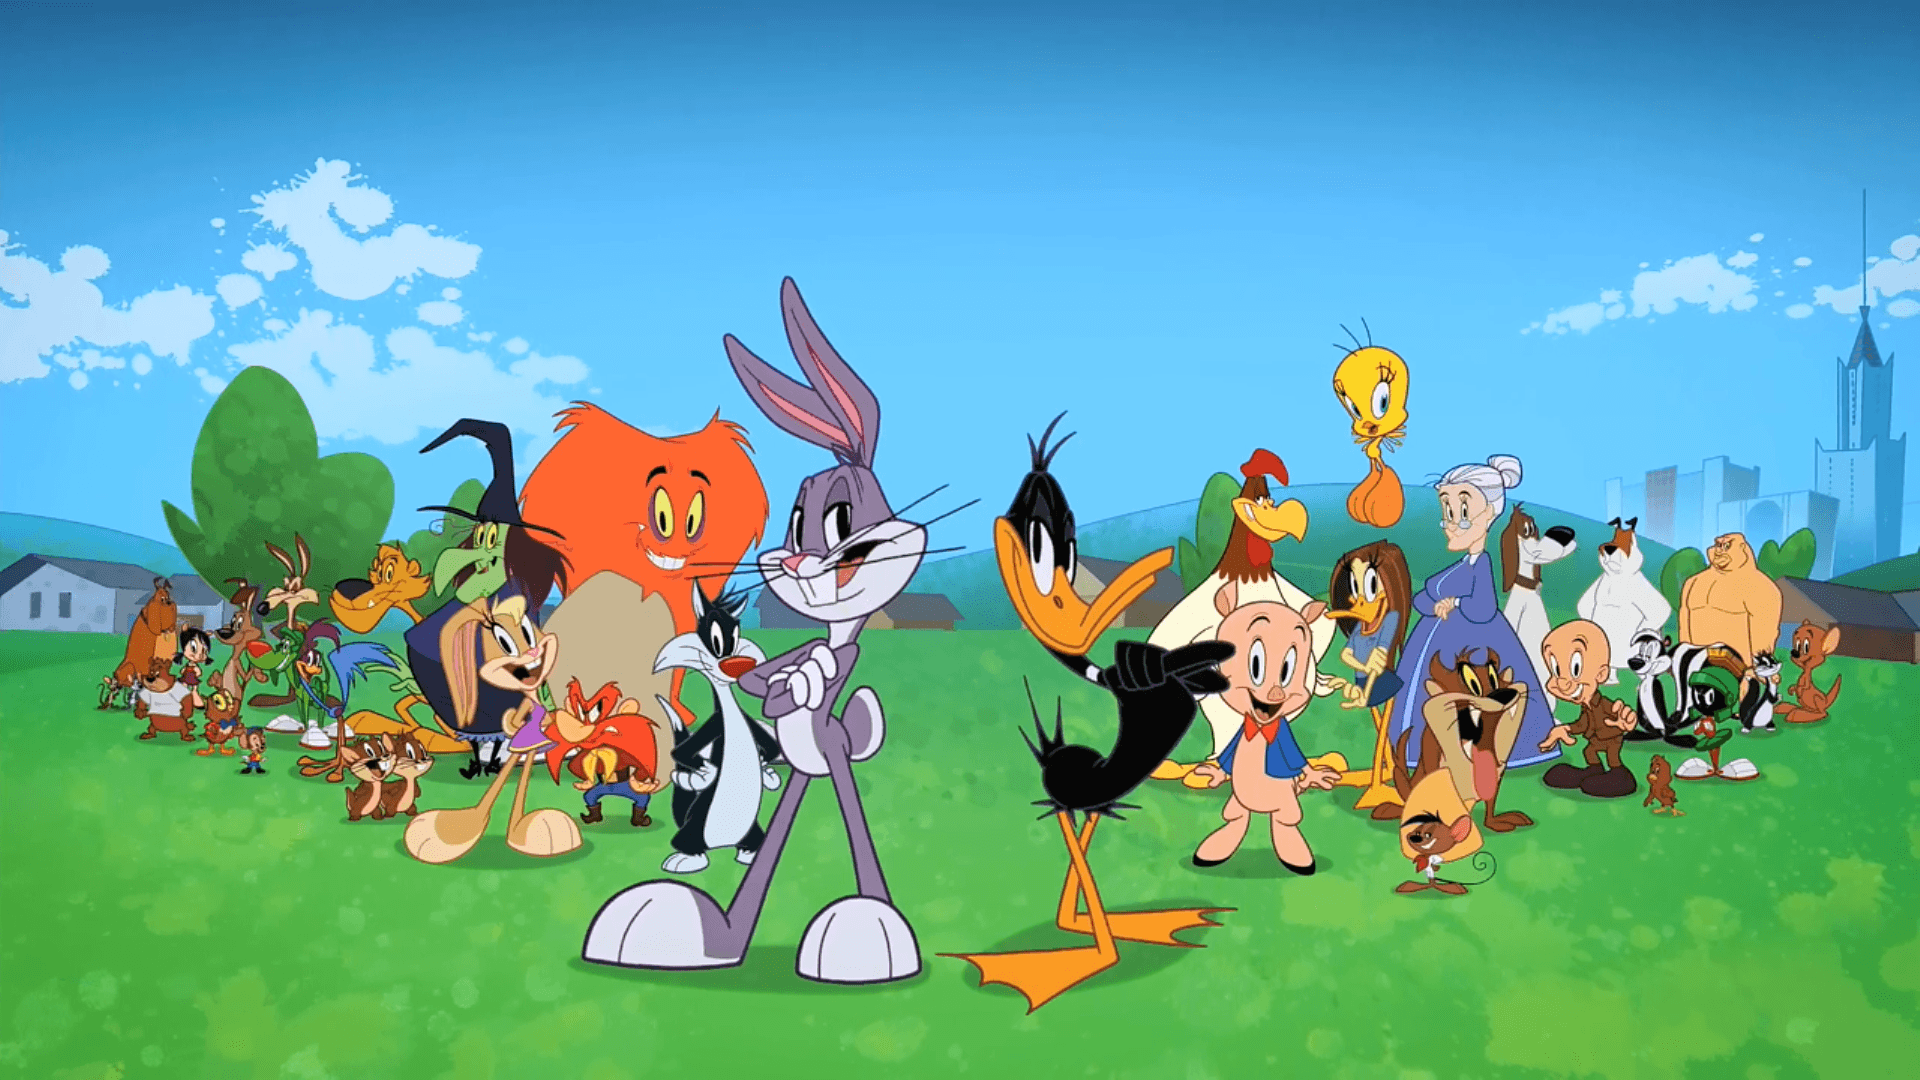 Looney Tunes Wallpaper Image for iPad Air 2